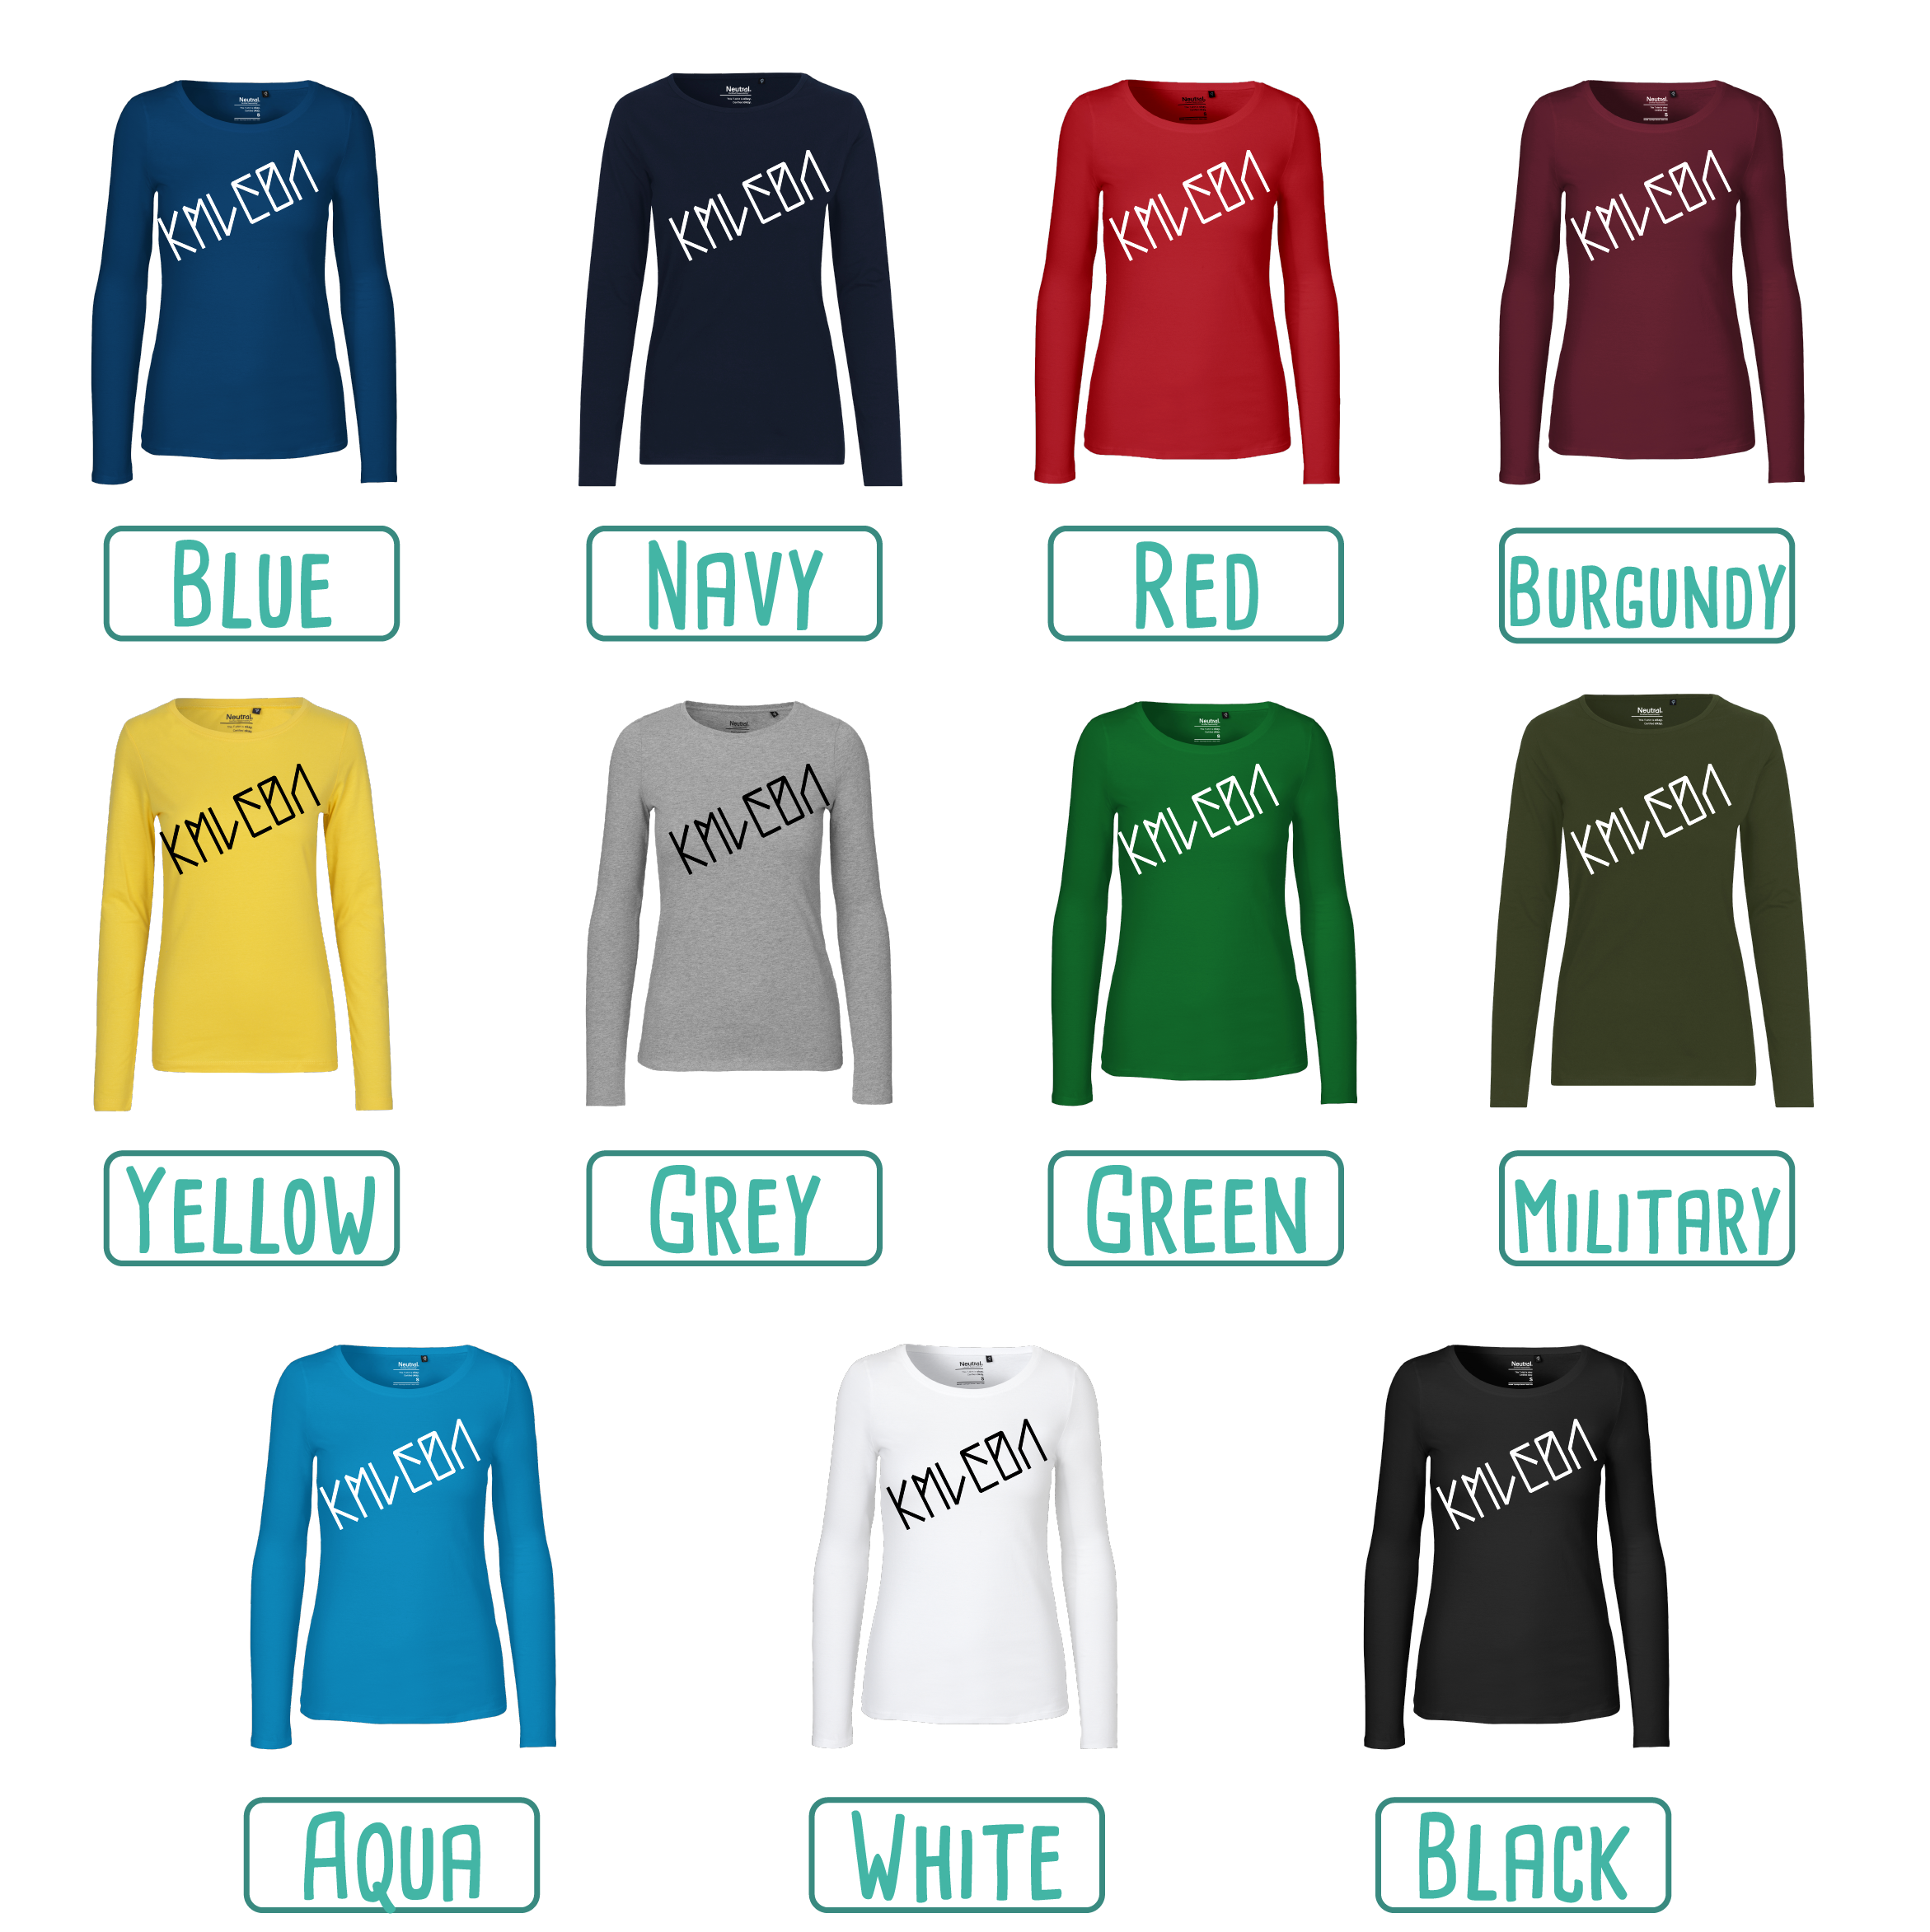 Colour options for adult shirts with long sleeves by KMLeon.